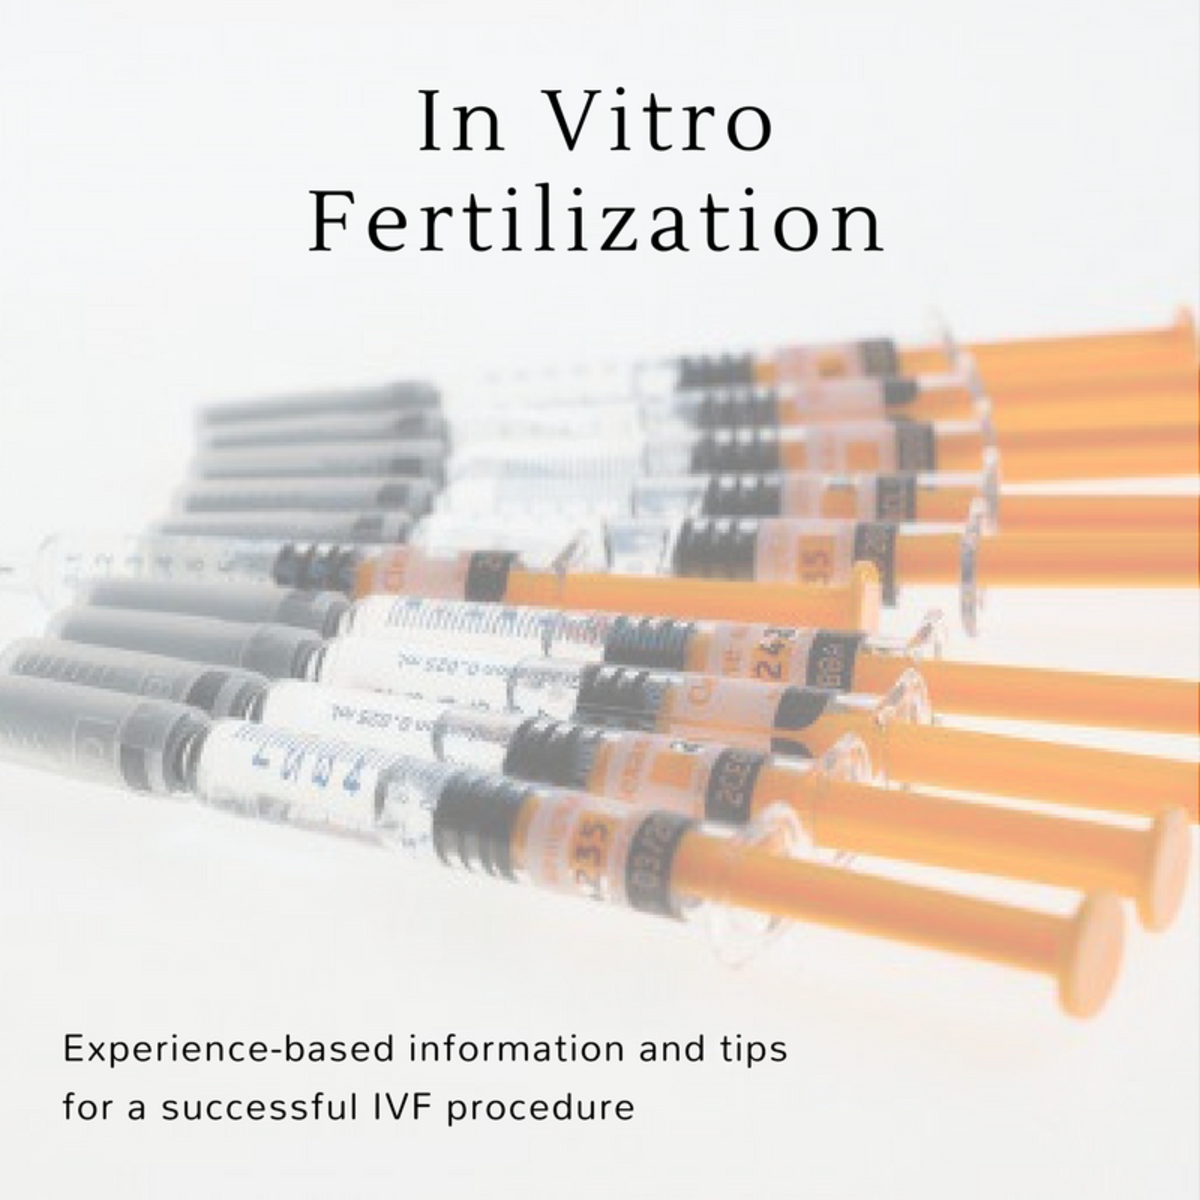 IVF Procedure: A Personal Step by Step Guide on the IVF Process